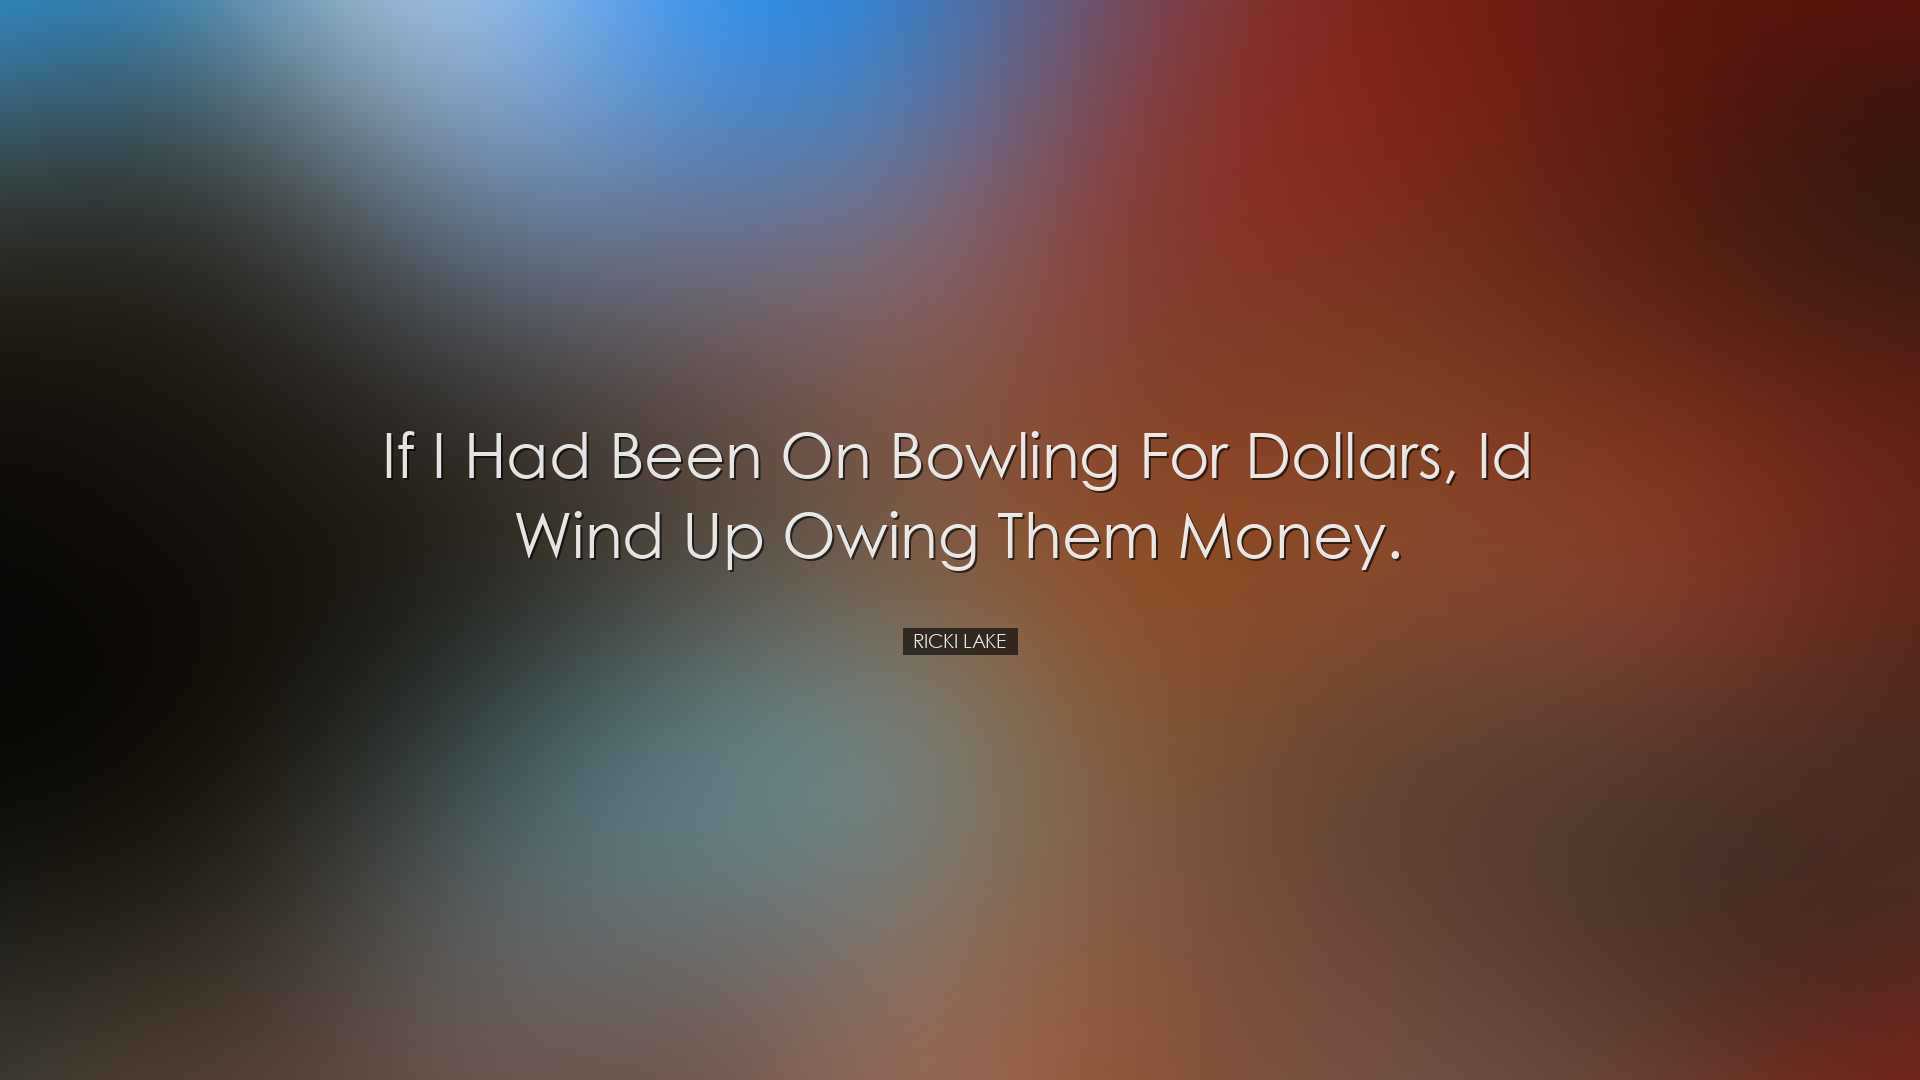 If I had been on Bowling for Dollars, Id wind up owing them money.